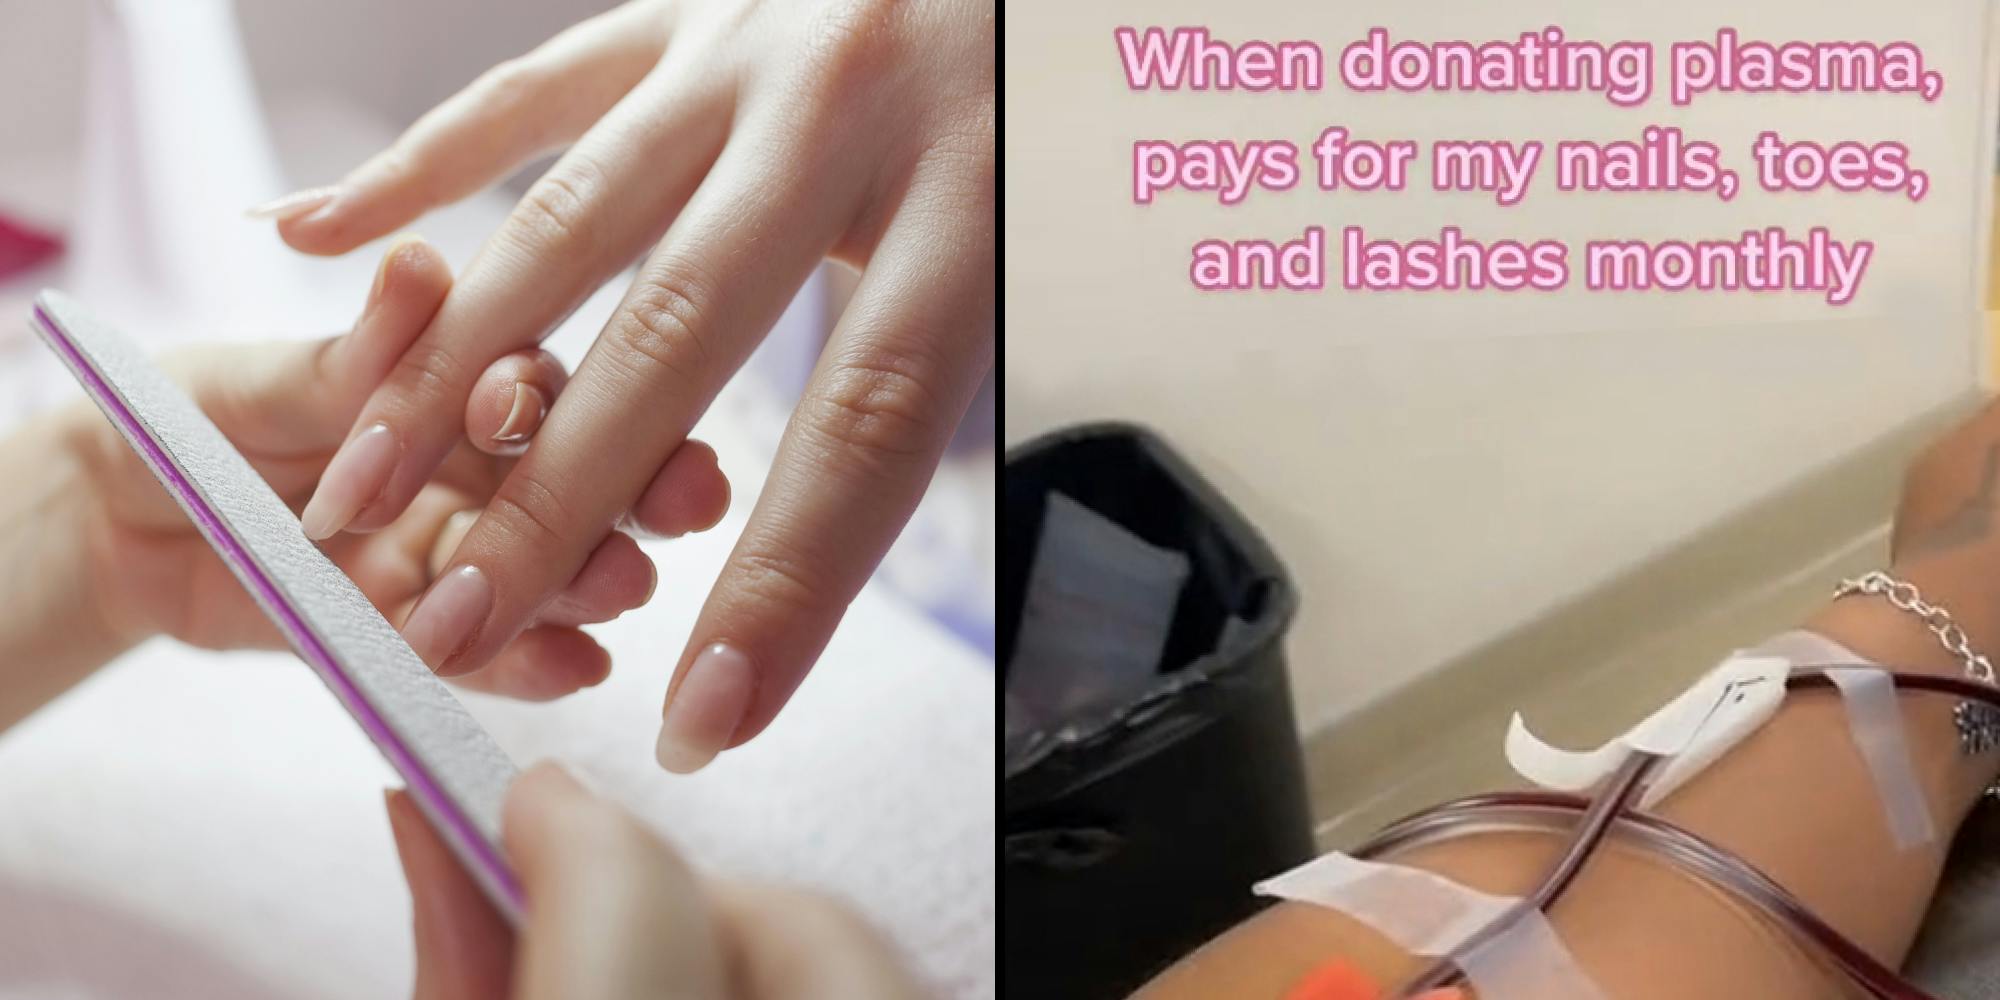 Woman hands getting nails done (l) Woman donating plasma caption "When donating plasma pays for my nails, toes, and lashes monthly" (r)